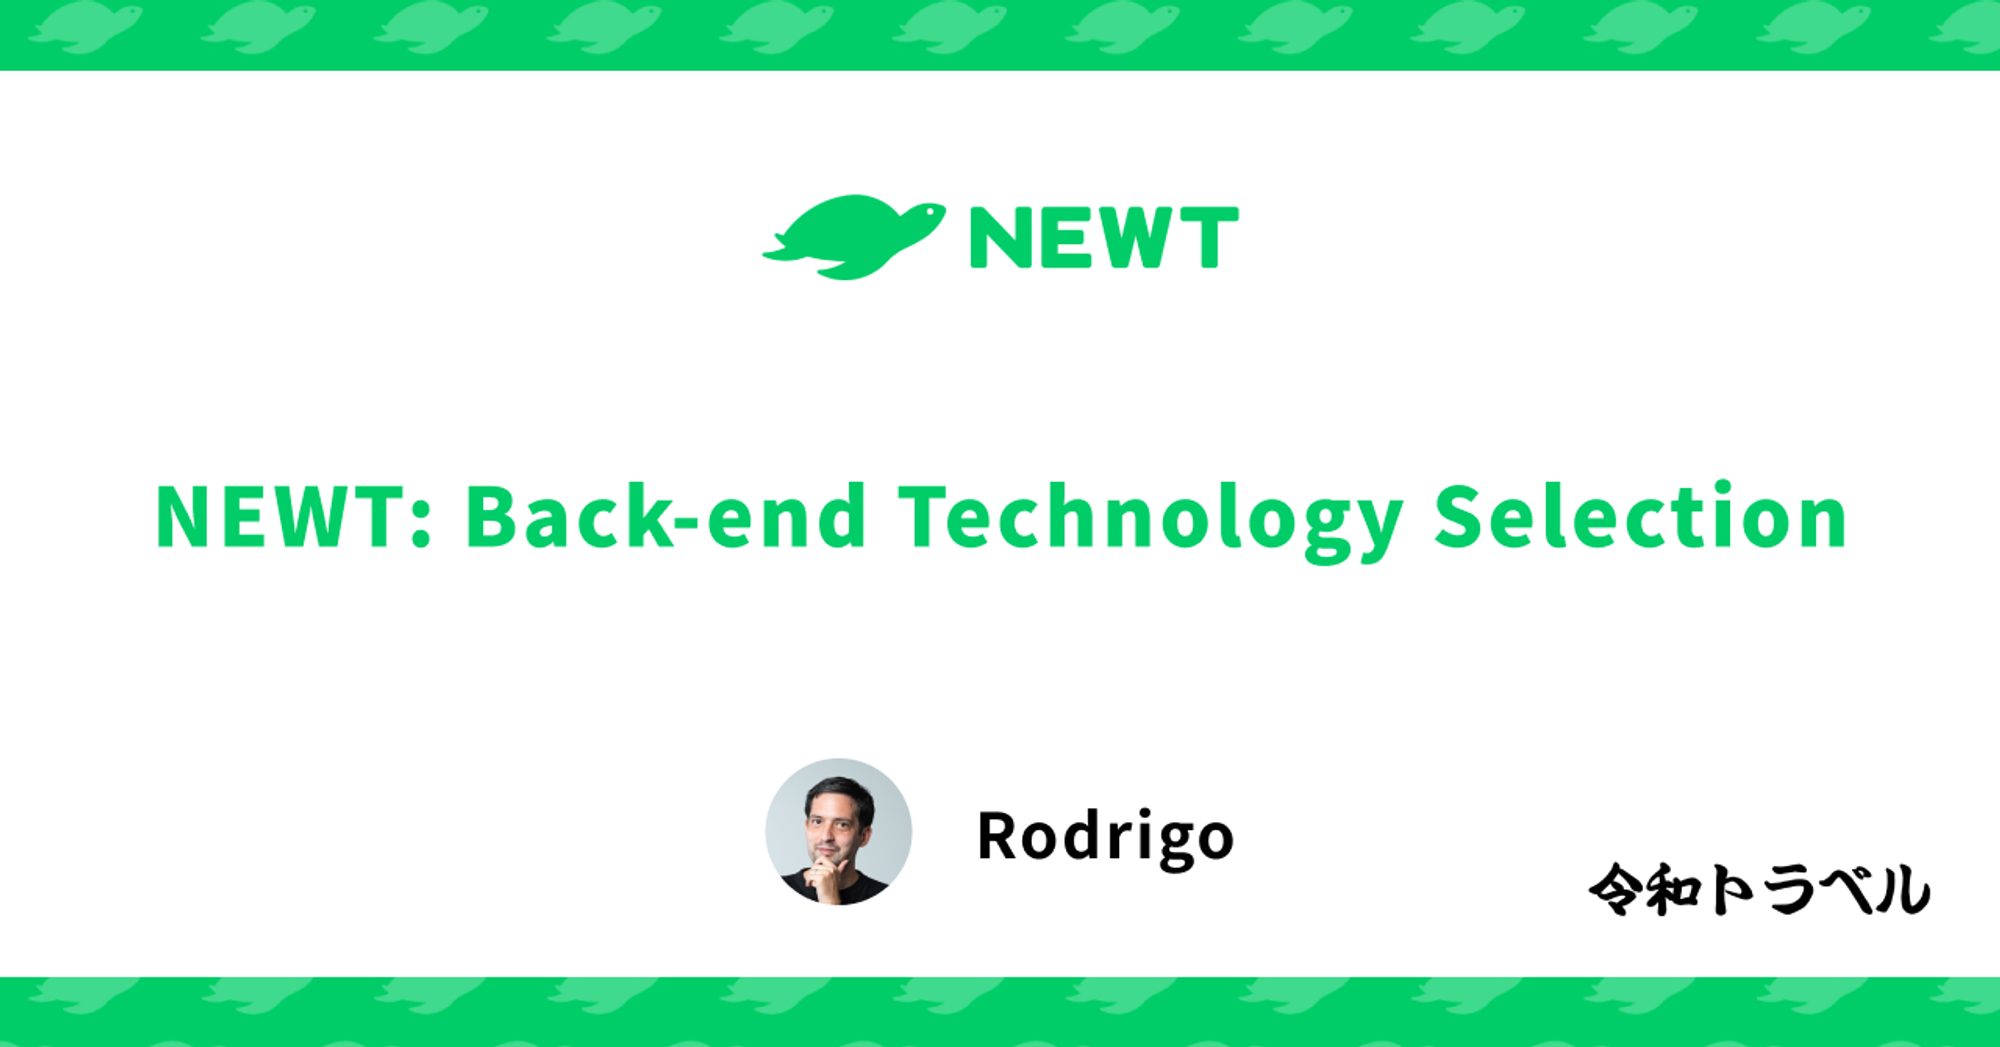 NEWT: Back-end Technology Selection